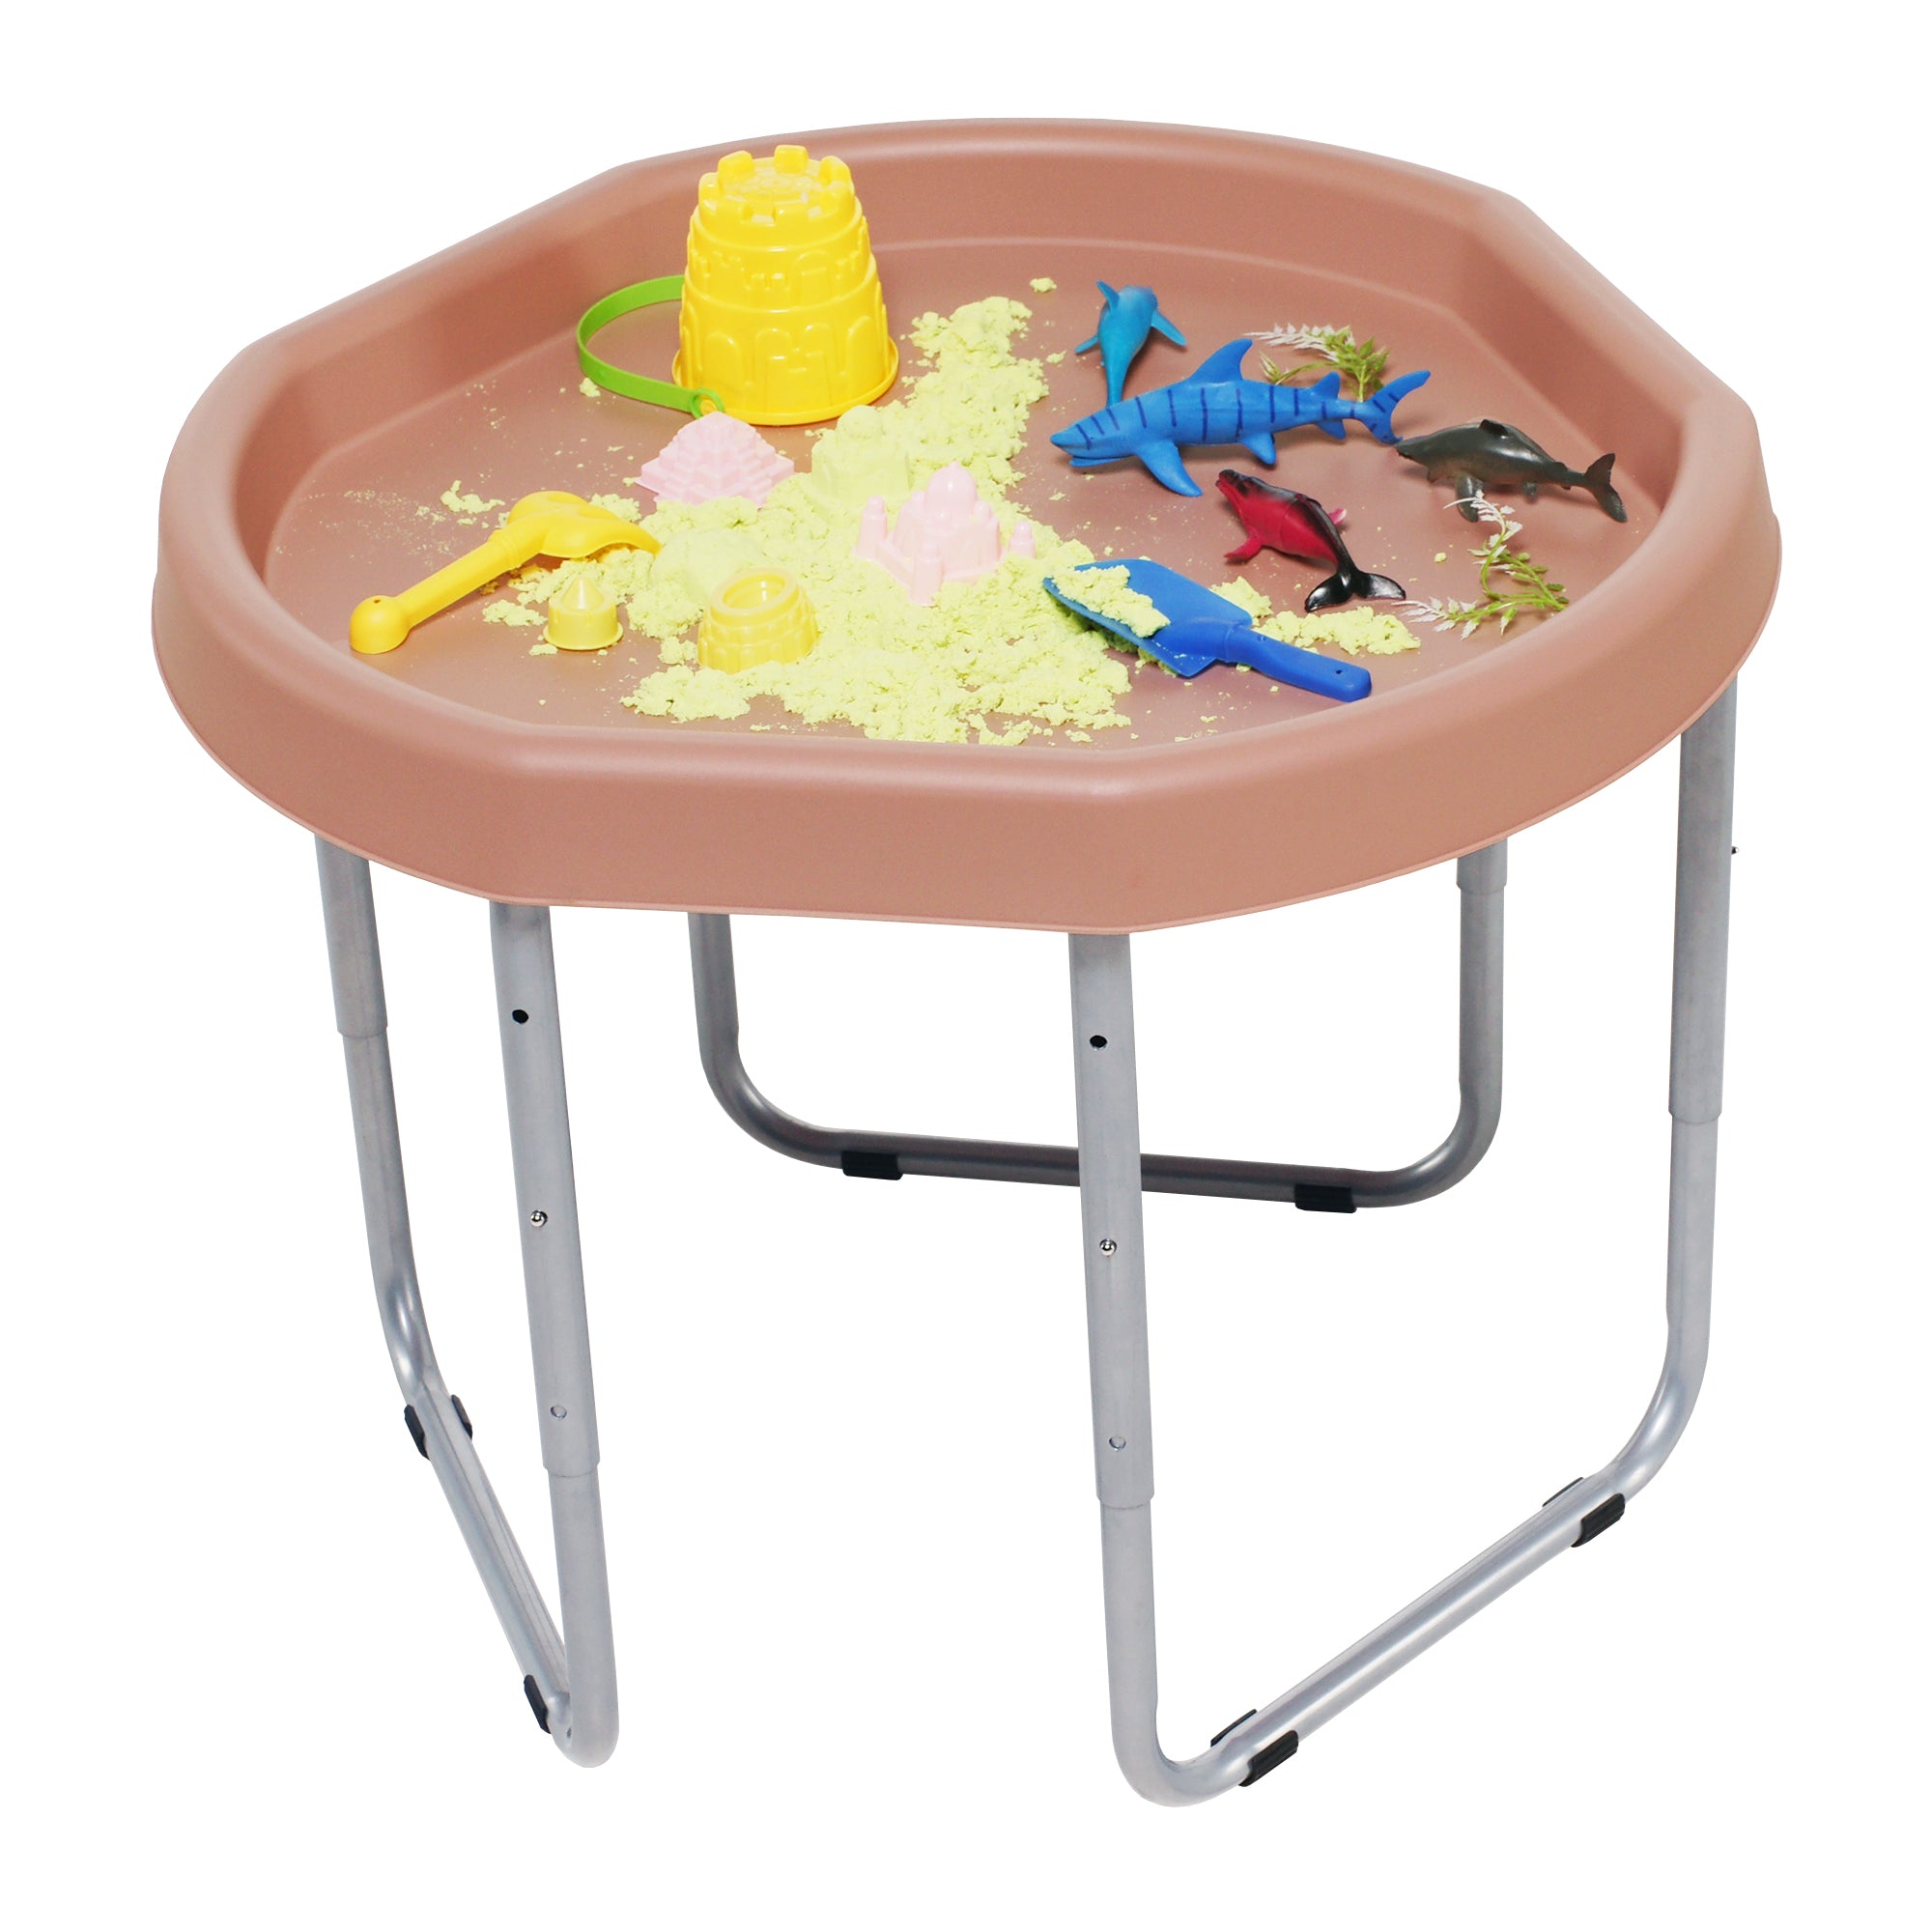 Original Hexacle Tuff Tray & Stand - 6 Colour Options